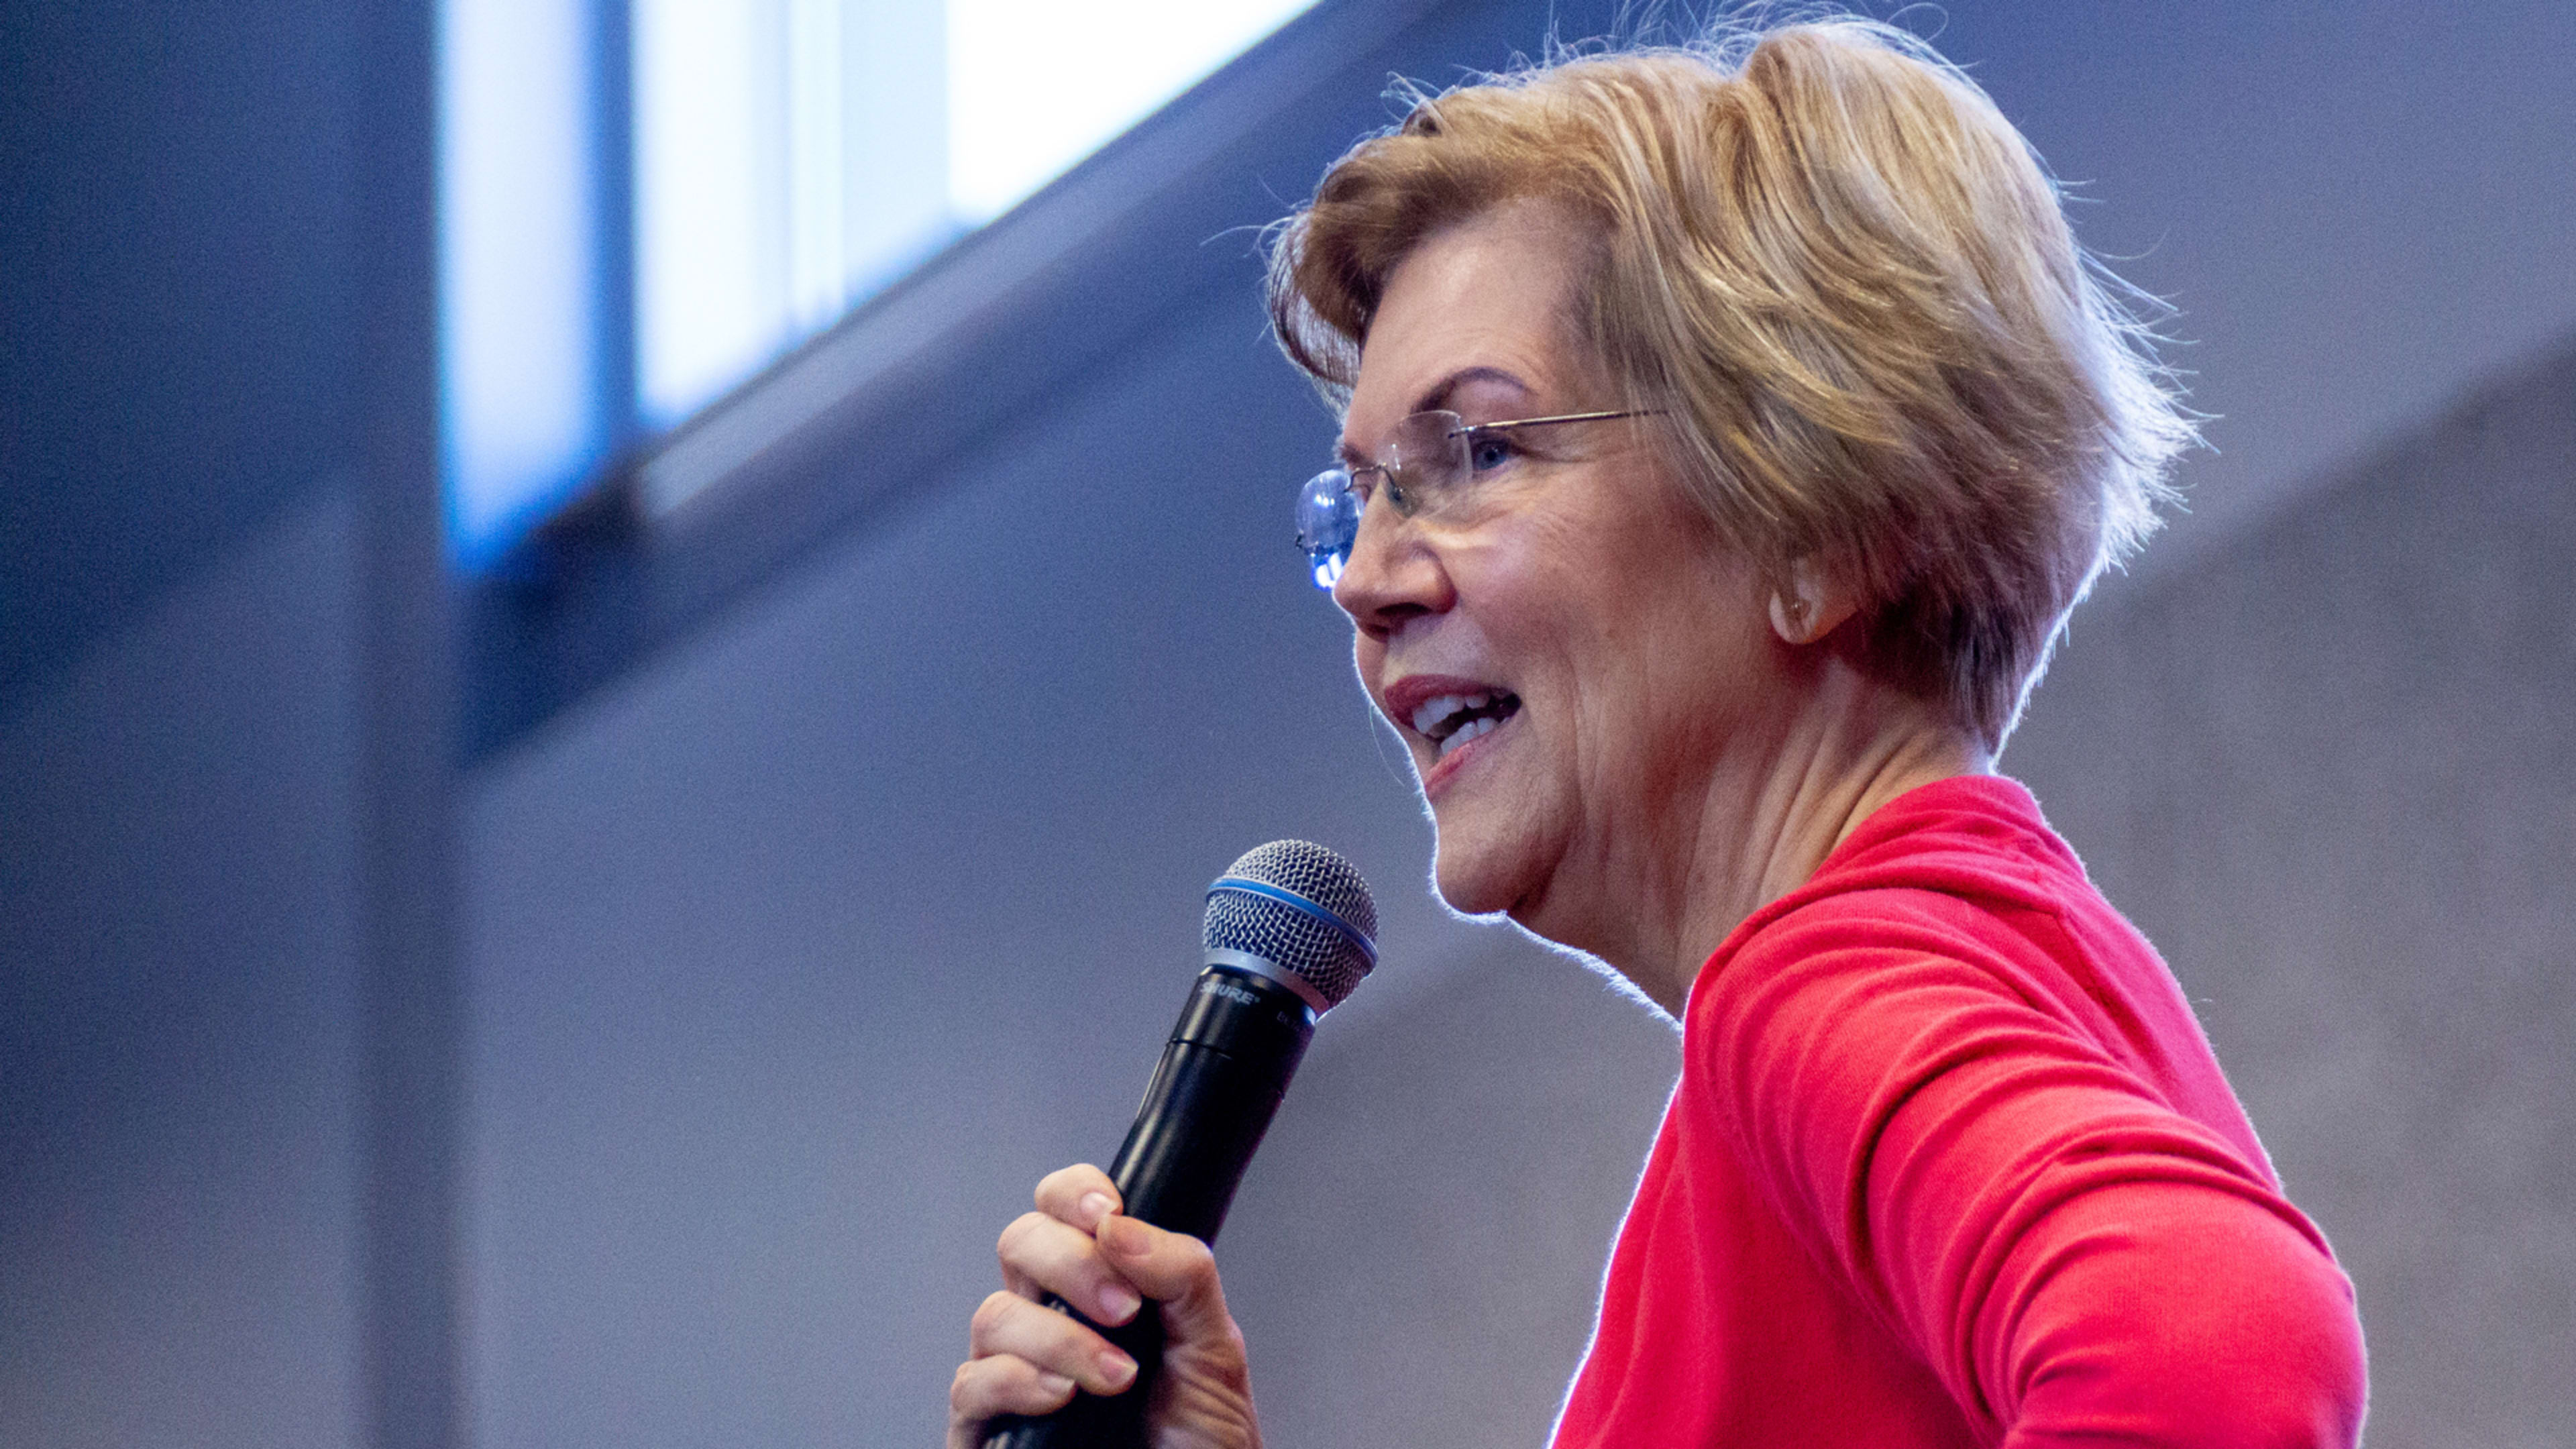 Facebook temporarily removed Elizabeth Warren ads that called for the company to be broken up